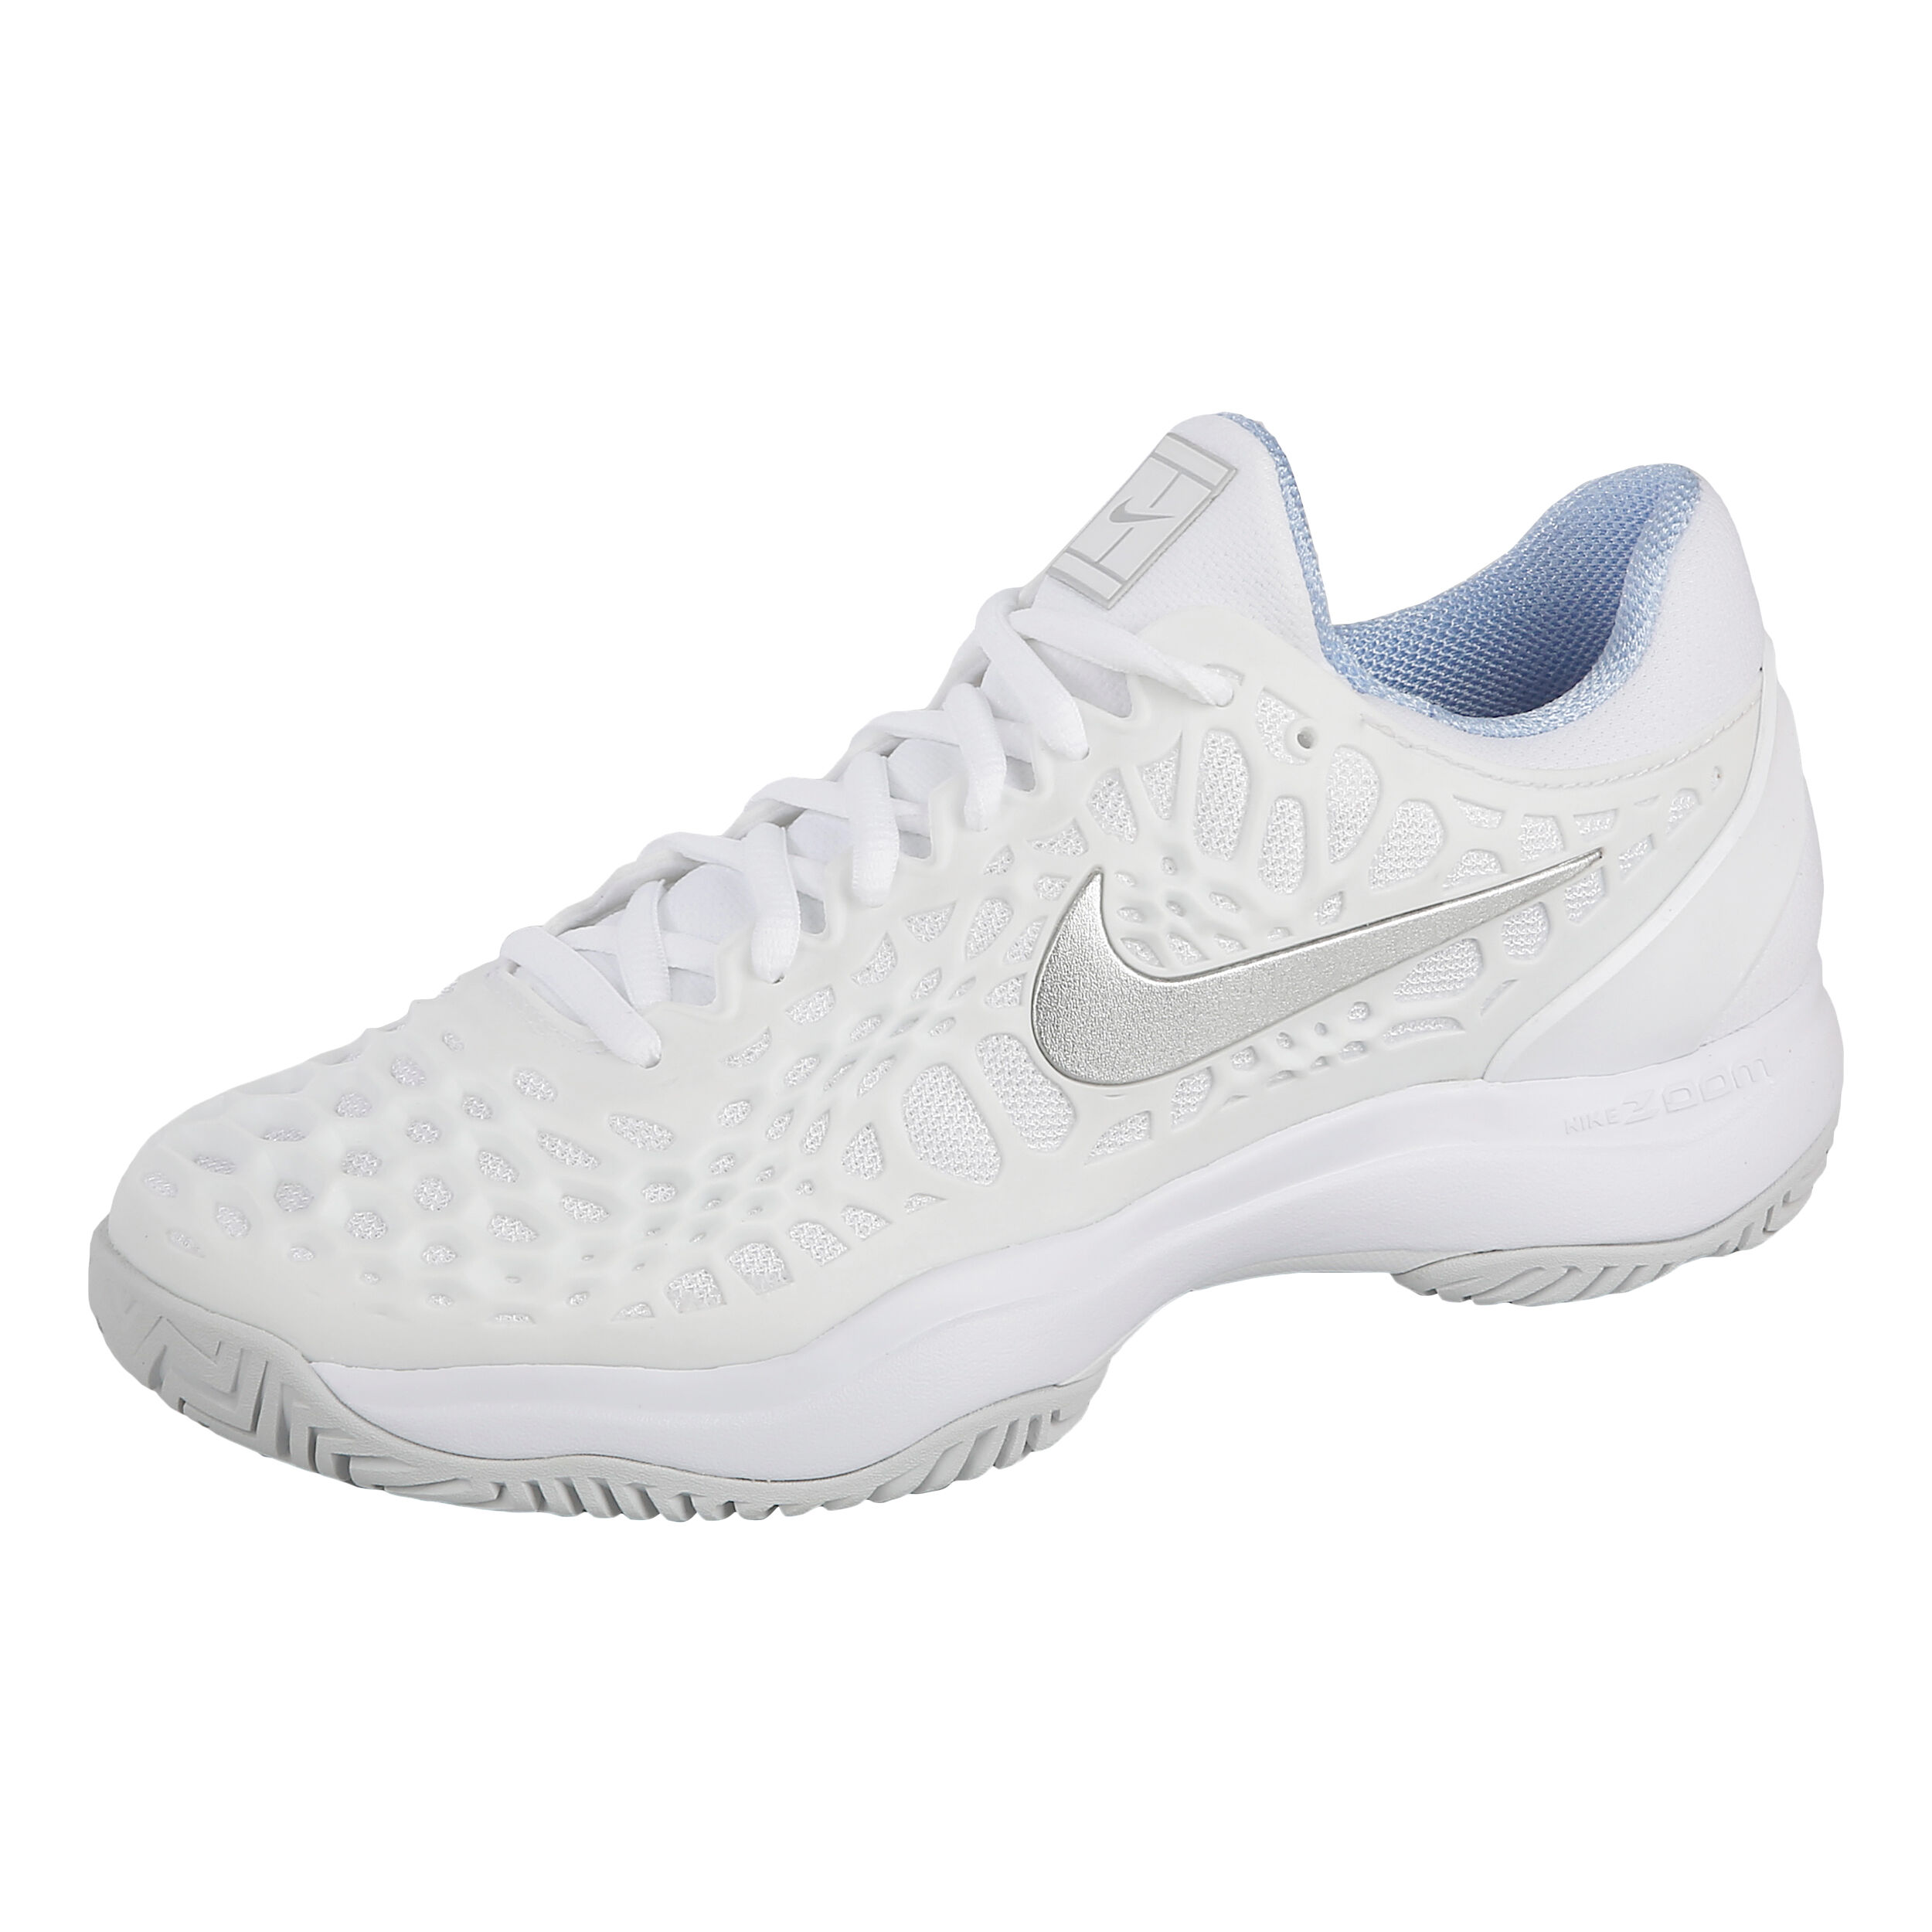 Buy Nike Zoom Cage 3 All Court Shoe Women White, Silver online